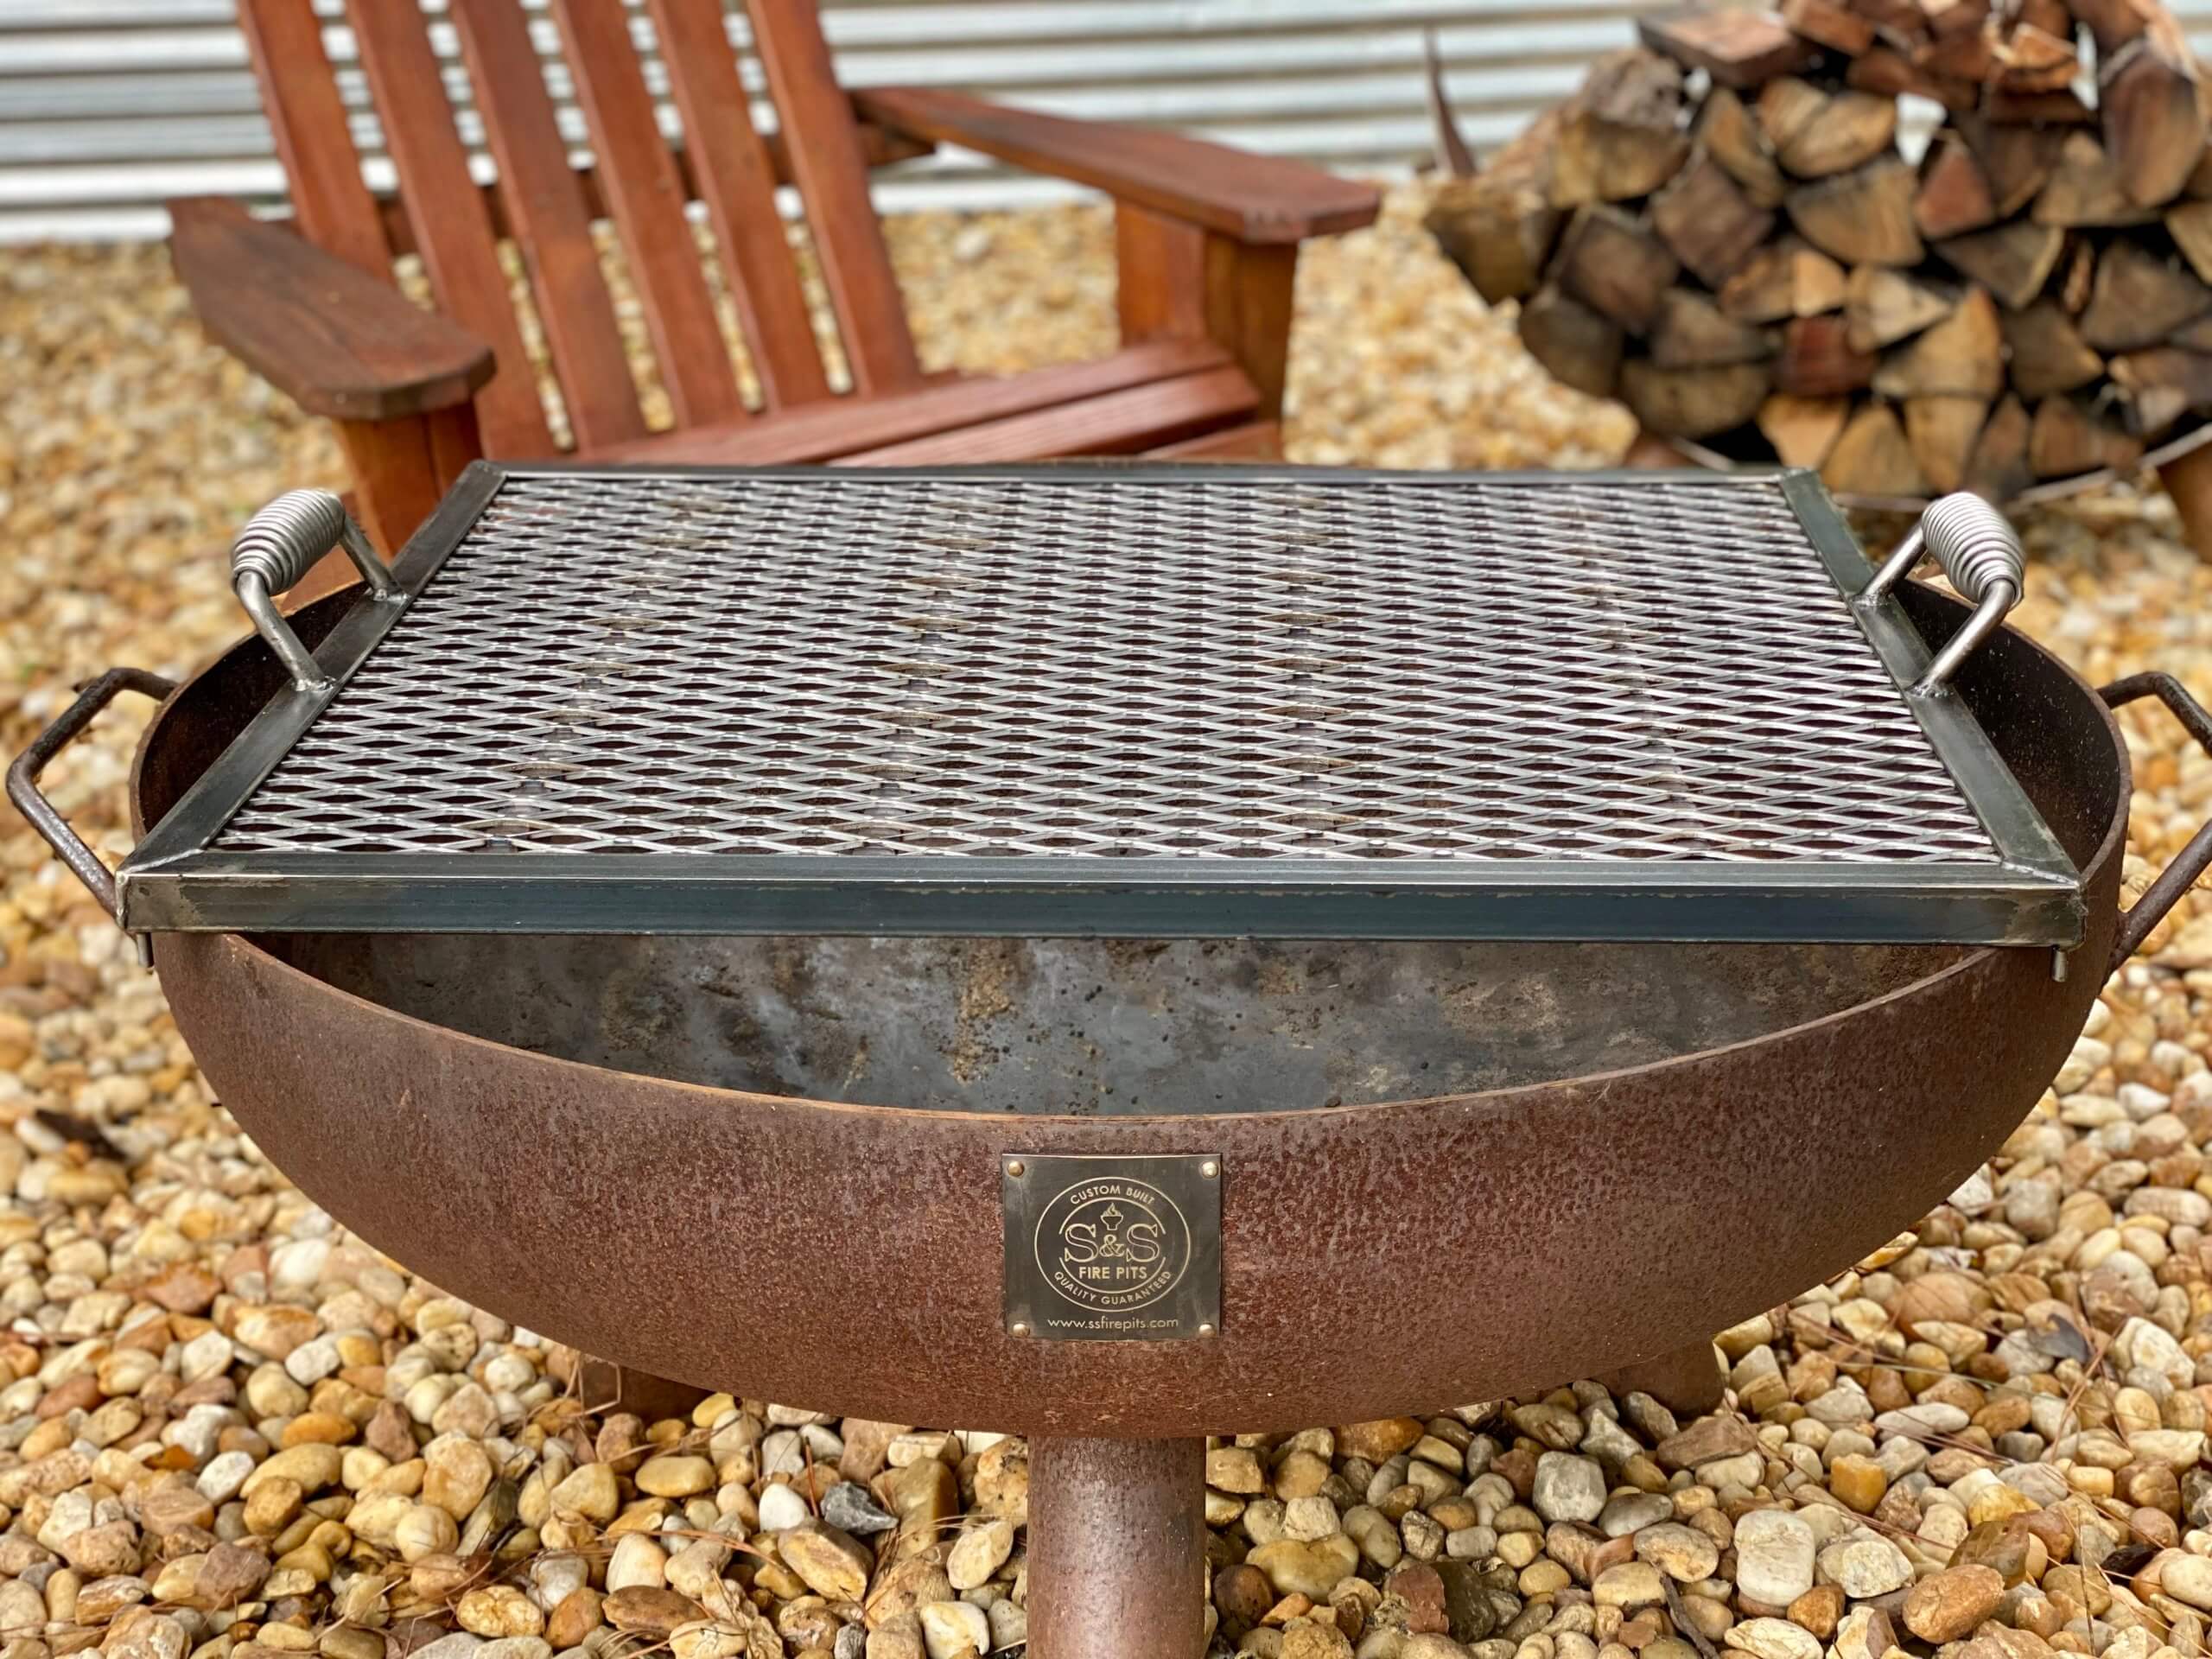 Handcrafted Fire Pit Cooking Grate, 36 Inch Round Grate For Outdoor Fire Pits